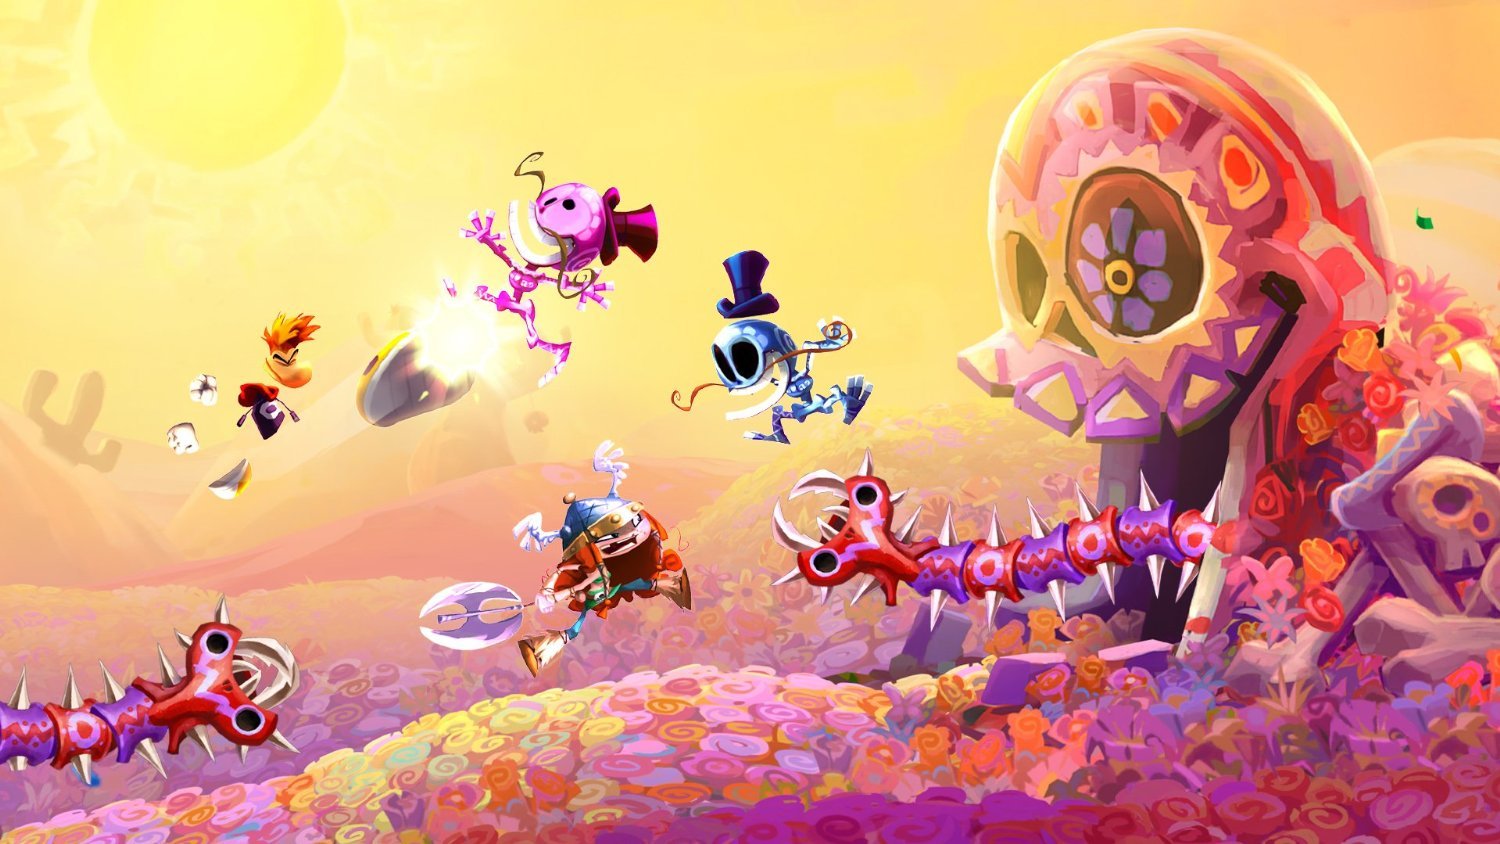 download rayman legends switch game